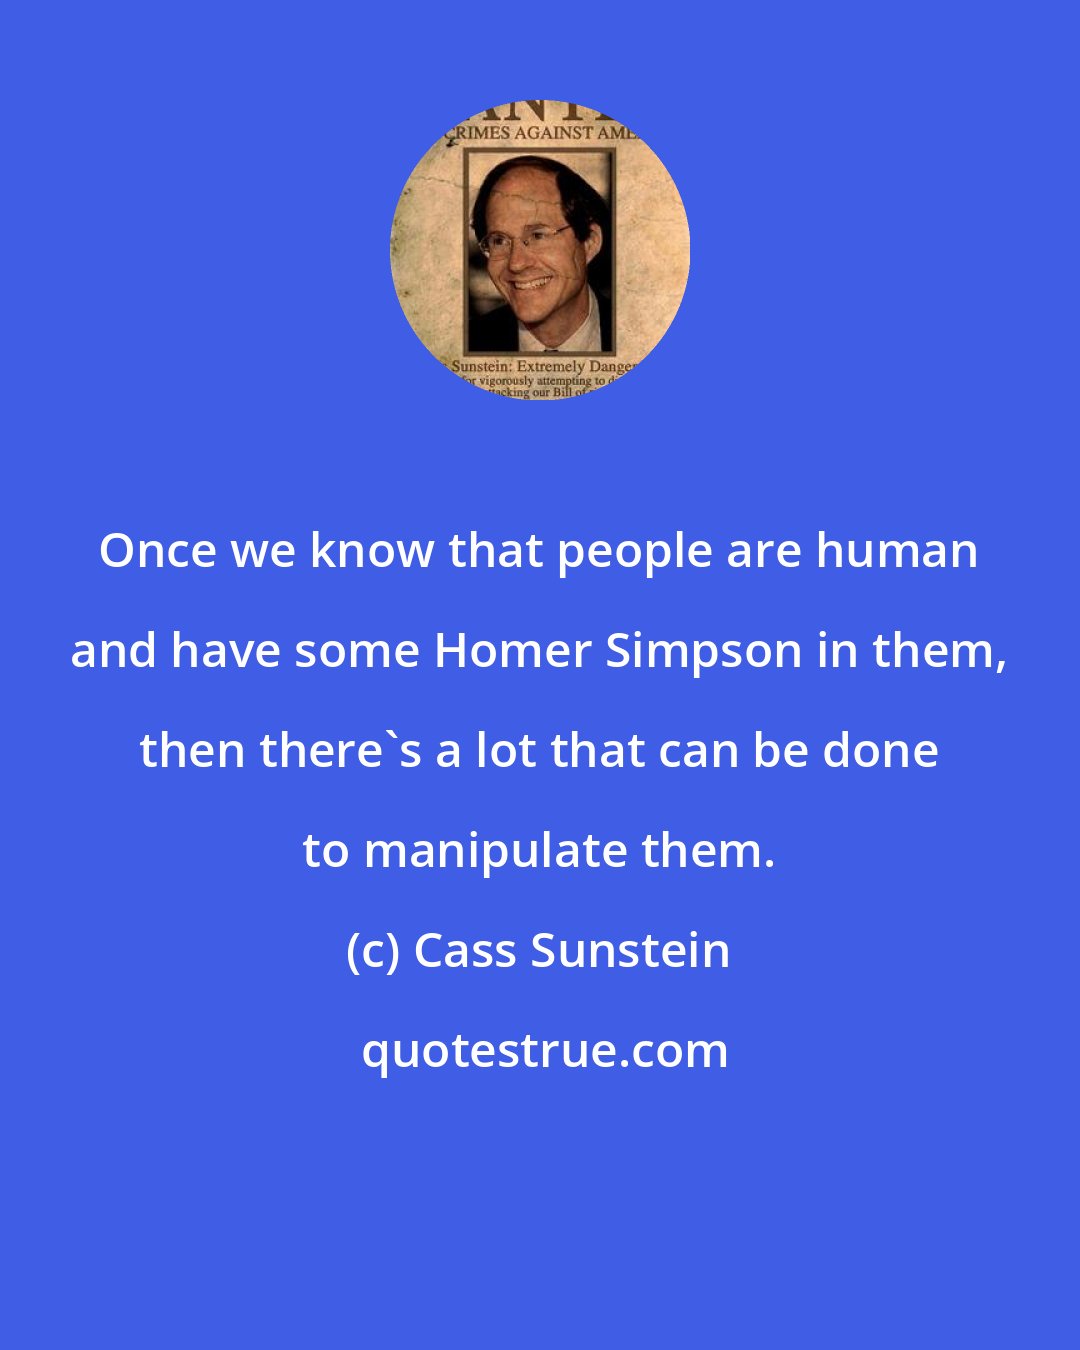 Cass Sunstein: Once we know that people are human and have some Homer Simpson in them, then there's a lot that can be done to manipulate them.